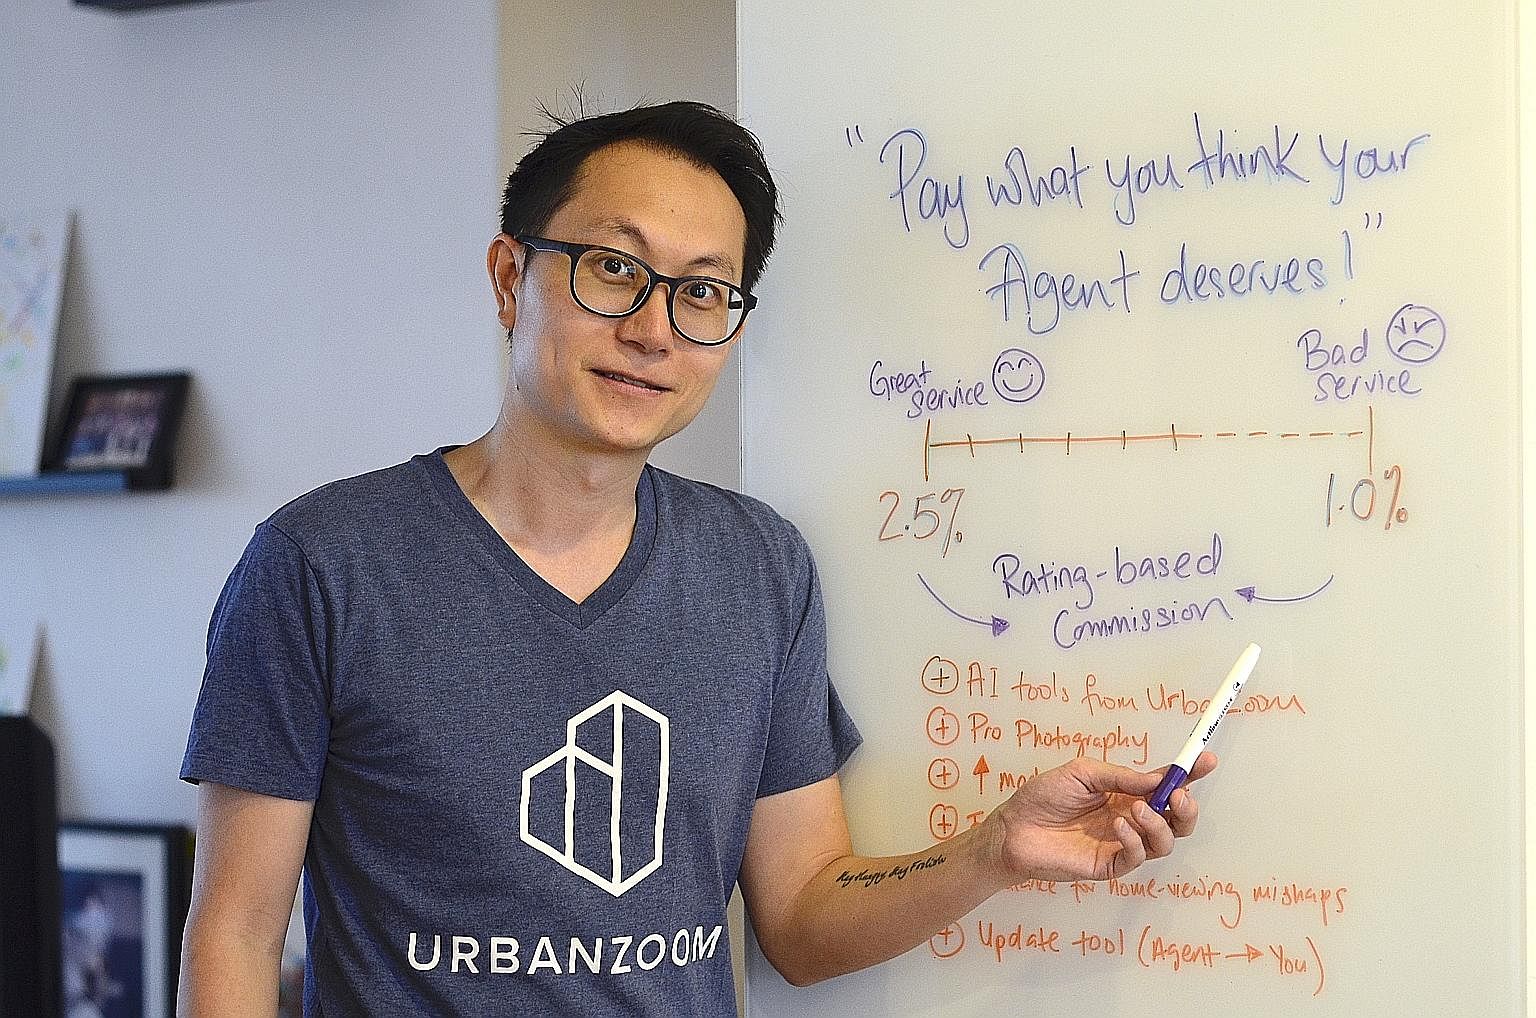 Mr Michael Cho launched his website Urban Agents last week. It connects home sellers to agents and lets them pay what they think the agent deserves.